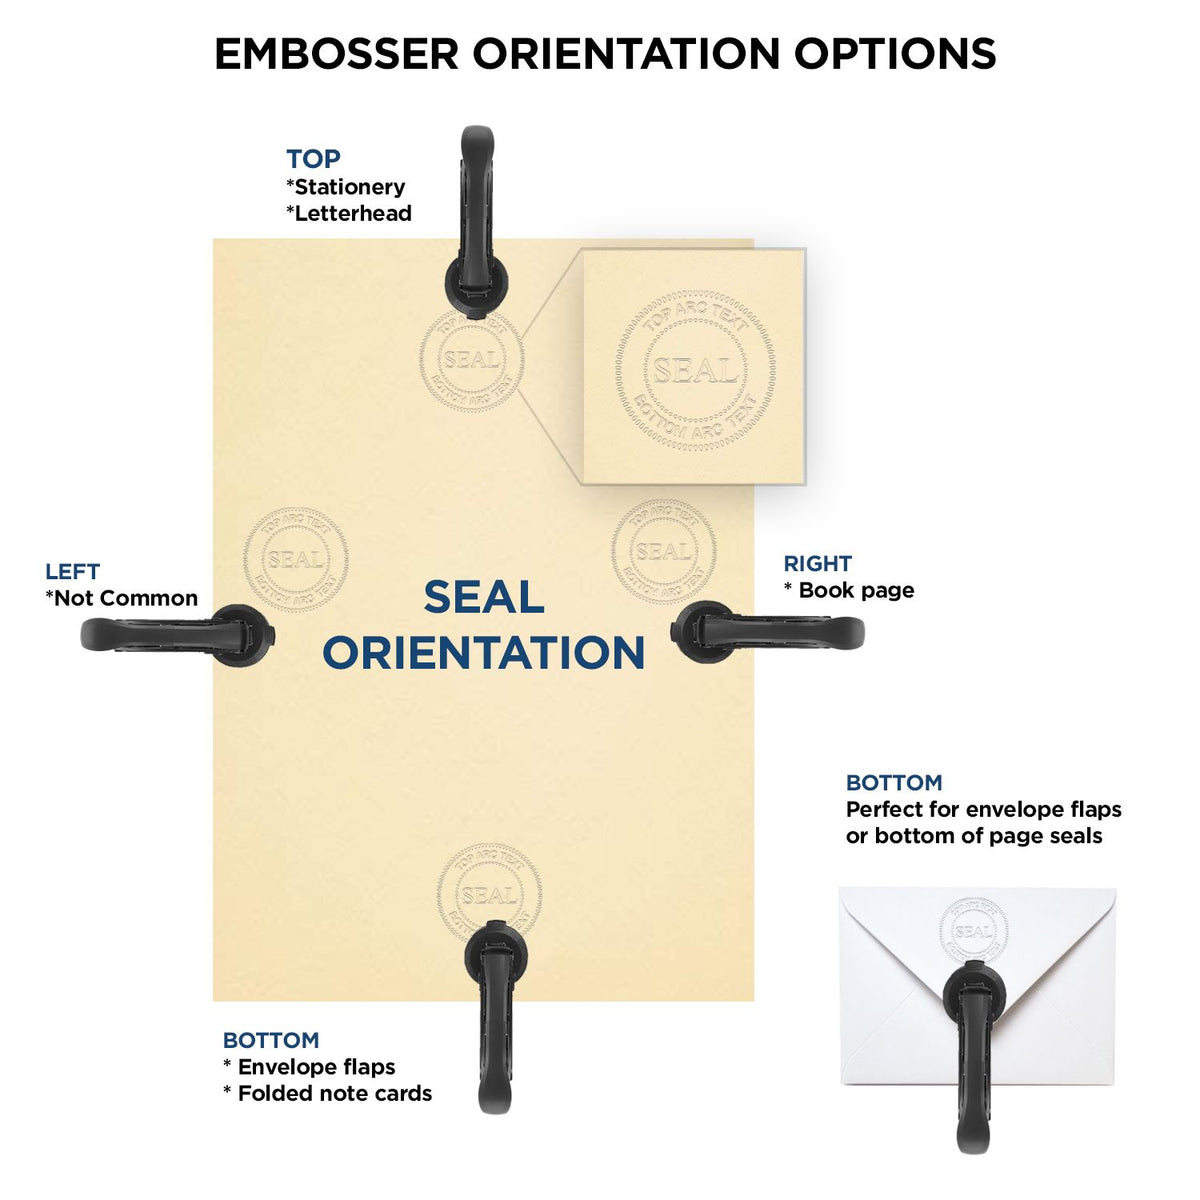 An infographic for the Handheld Ohio Professional Geologist Embosser showing embosser orientation, this is showing examples of a top, bottom, right and left insert.